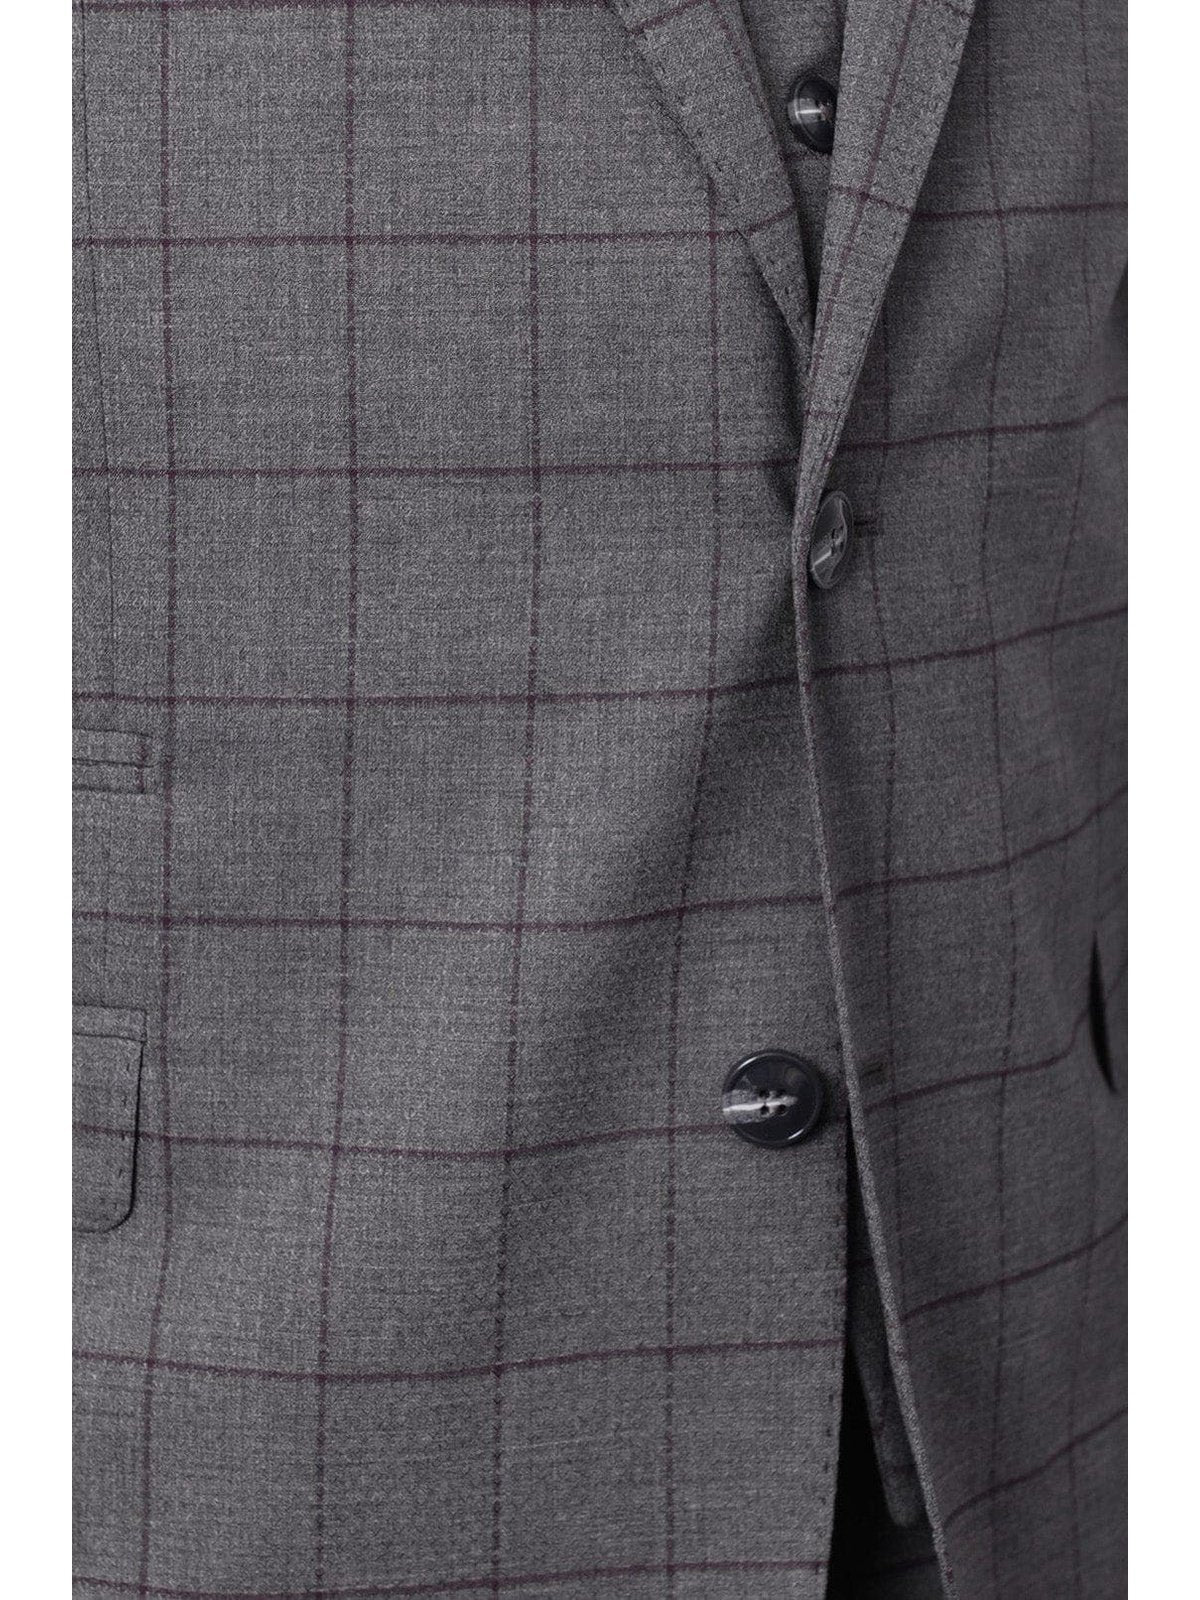 Extrema Extrema Mens Gray Check Wool Blend 3 Piece Vested Regular Fit Suit